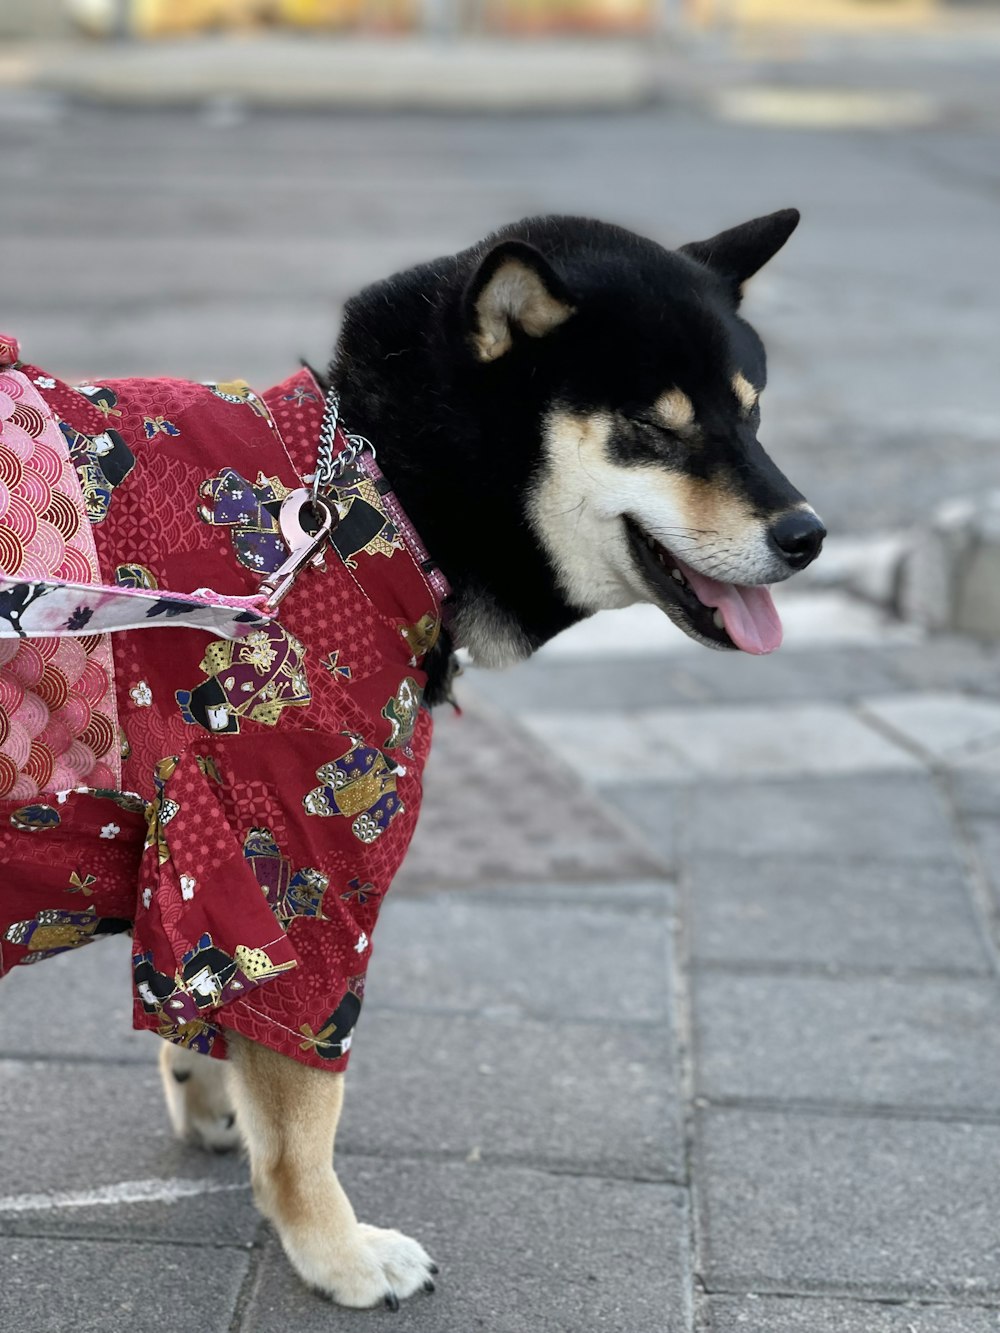 a black and white dog wearing a red jacket